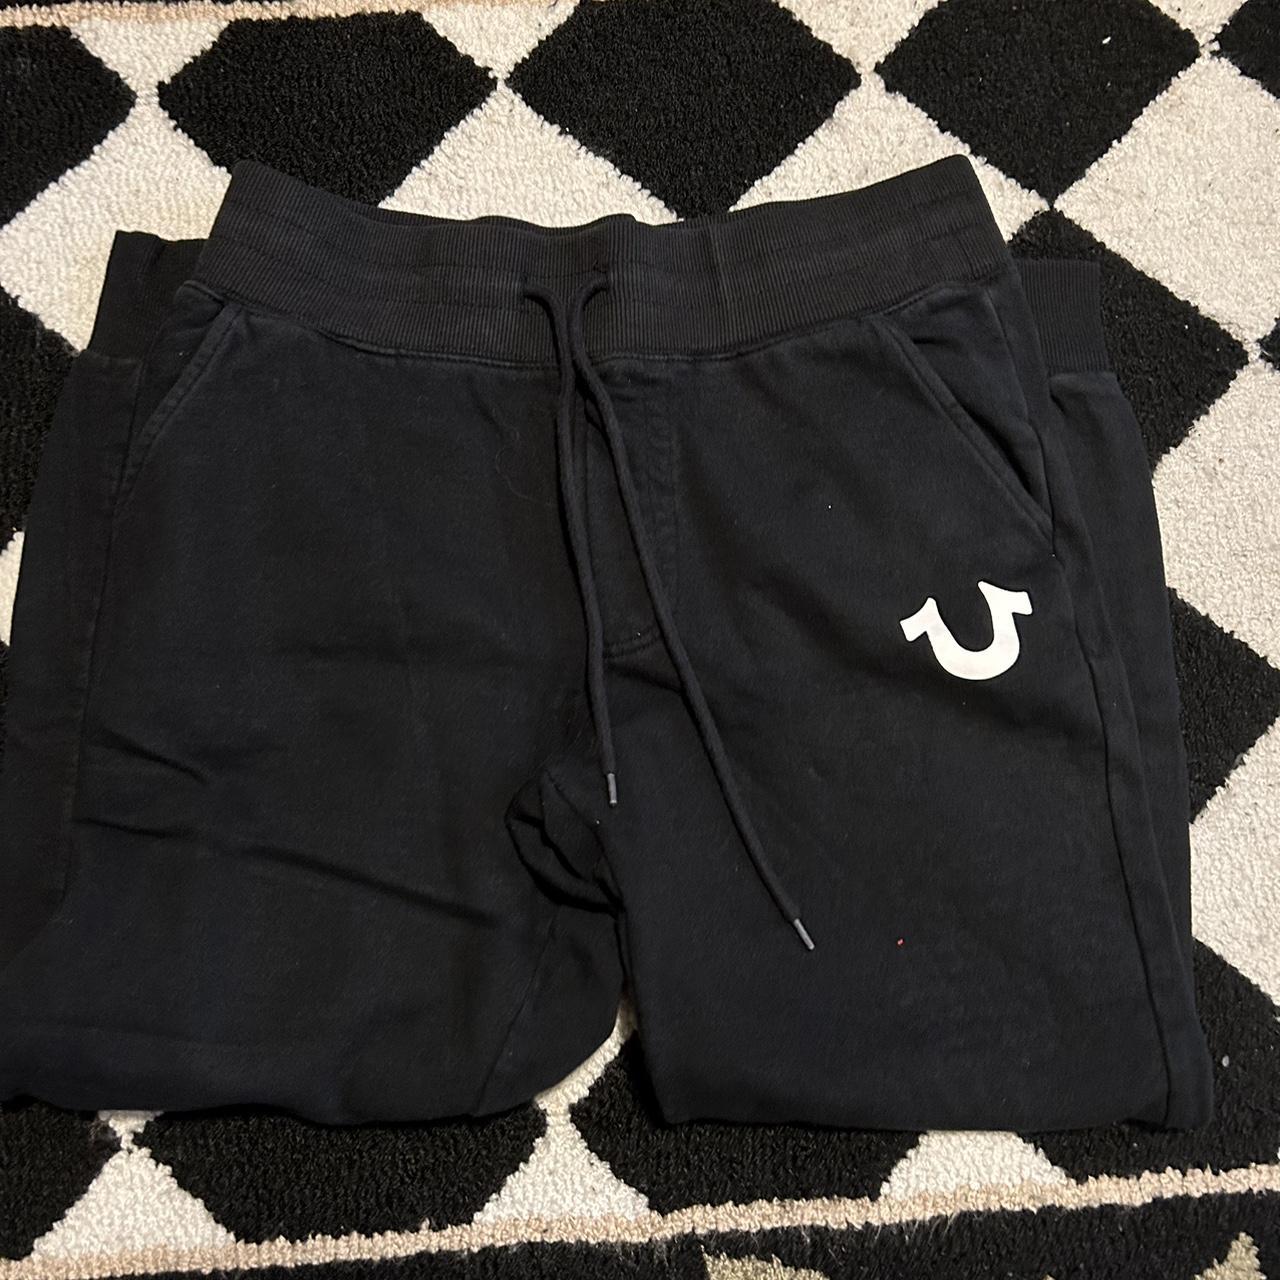 True Religion Women's Black and White Joggers-tracksuits | Depop